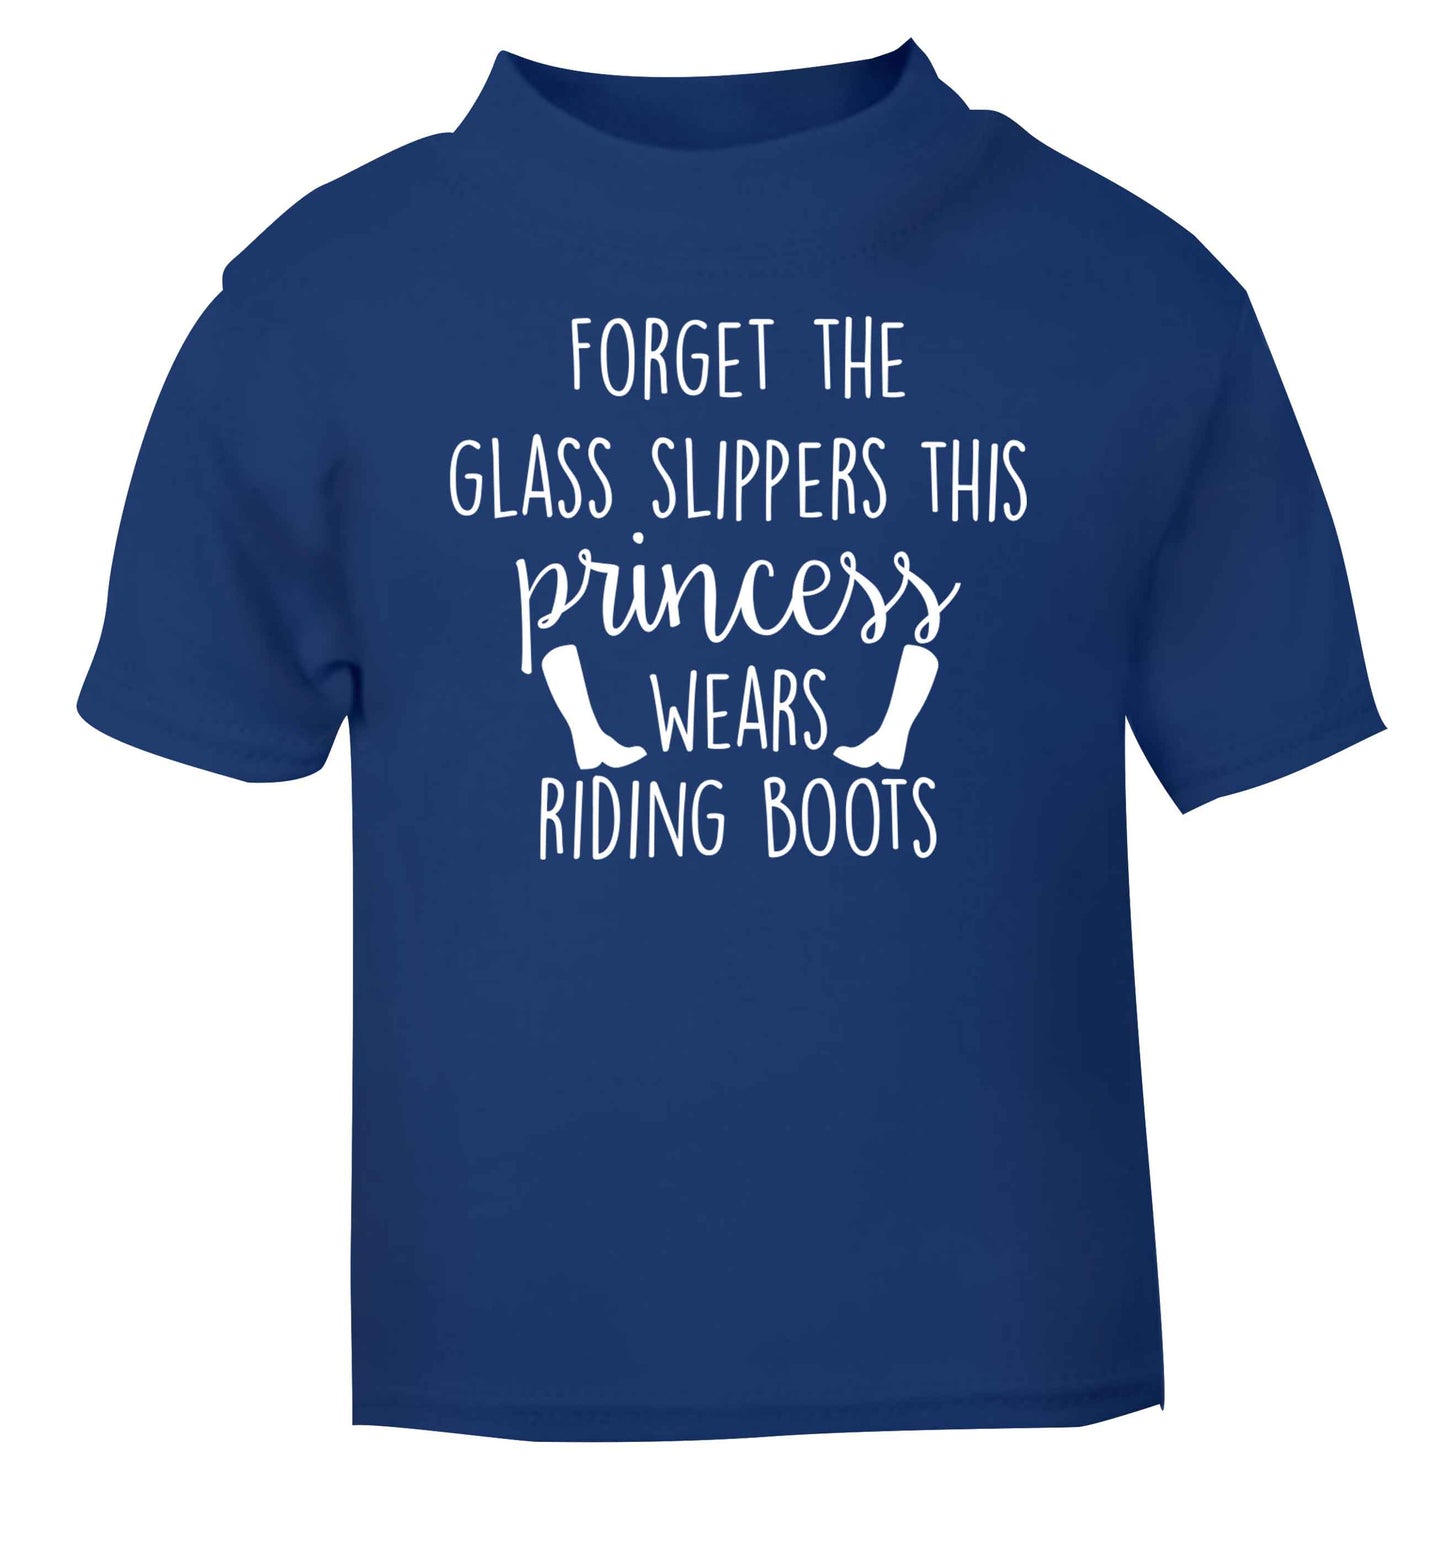 Forget the glass slippers this princess wears riding boots blue baby toddler Tshirt 2 Years